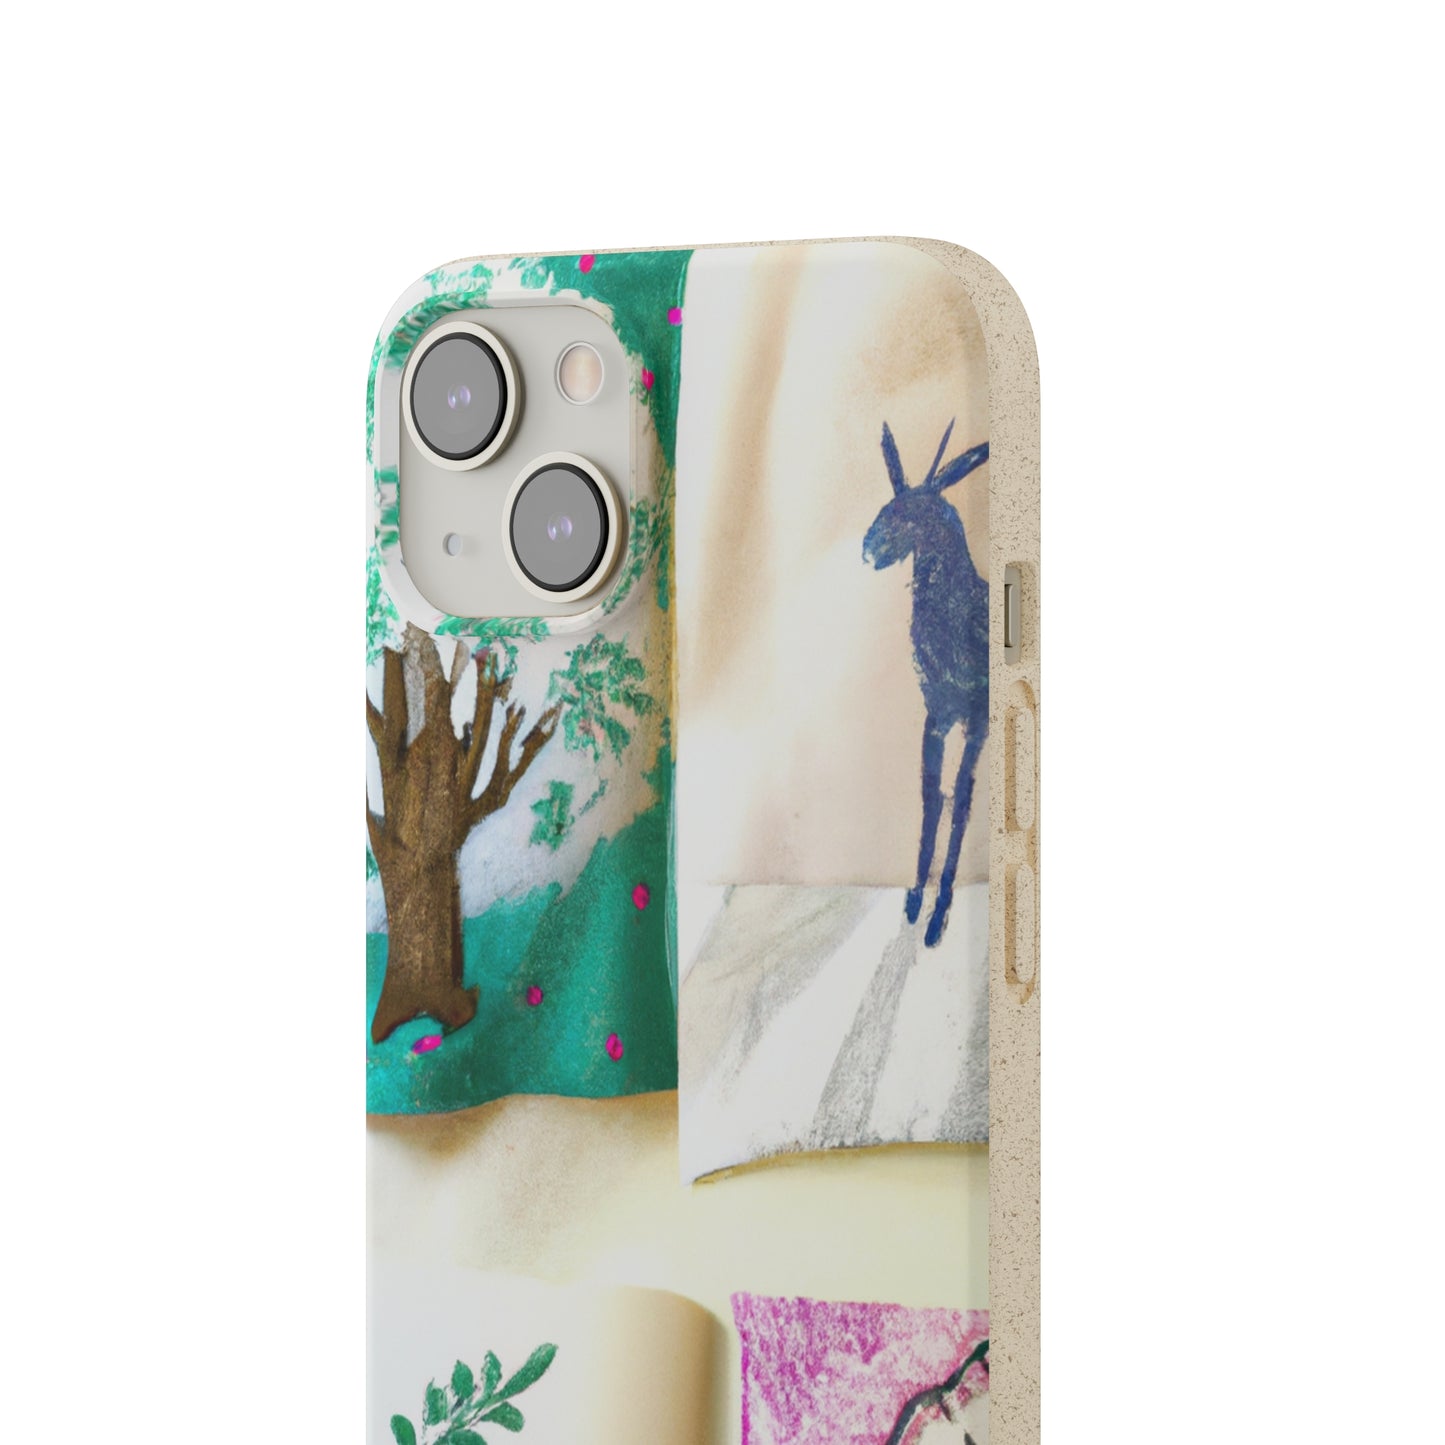 "My Story in Collage" - Bam Boo! Lifestyle Eco-friendly Cases